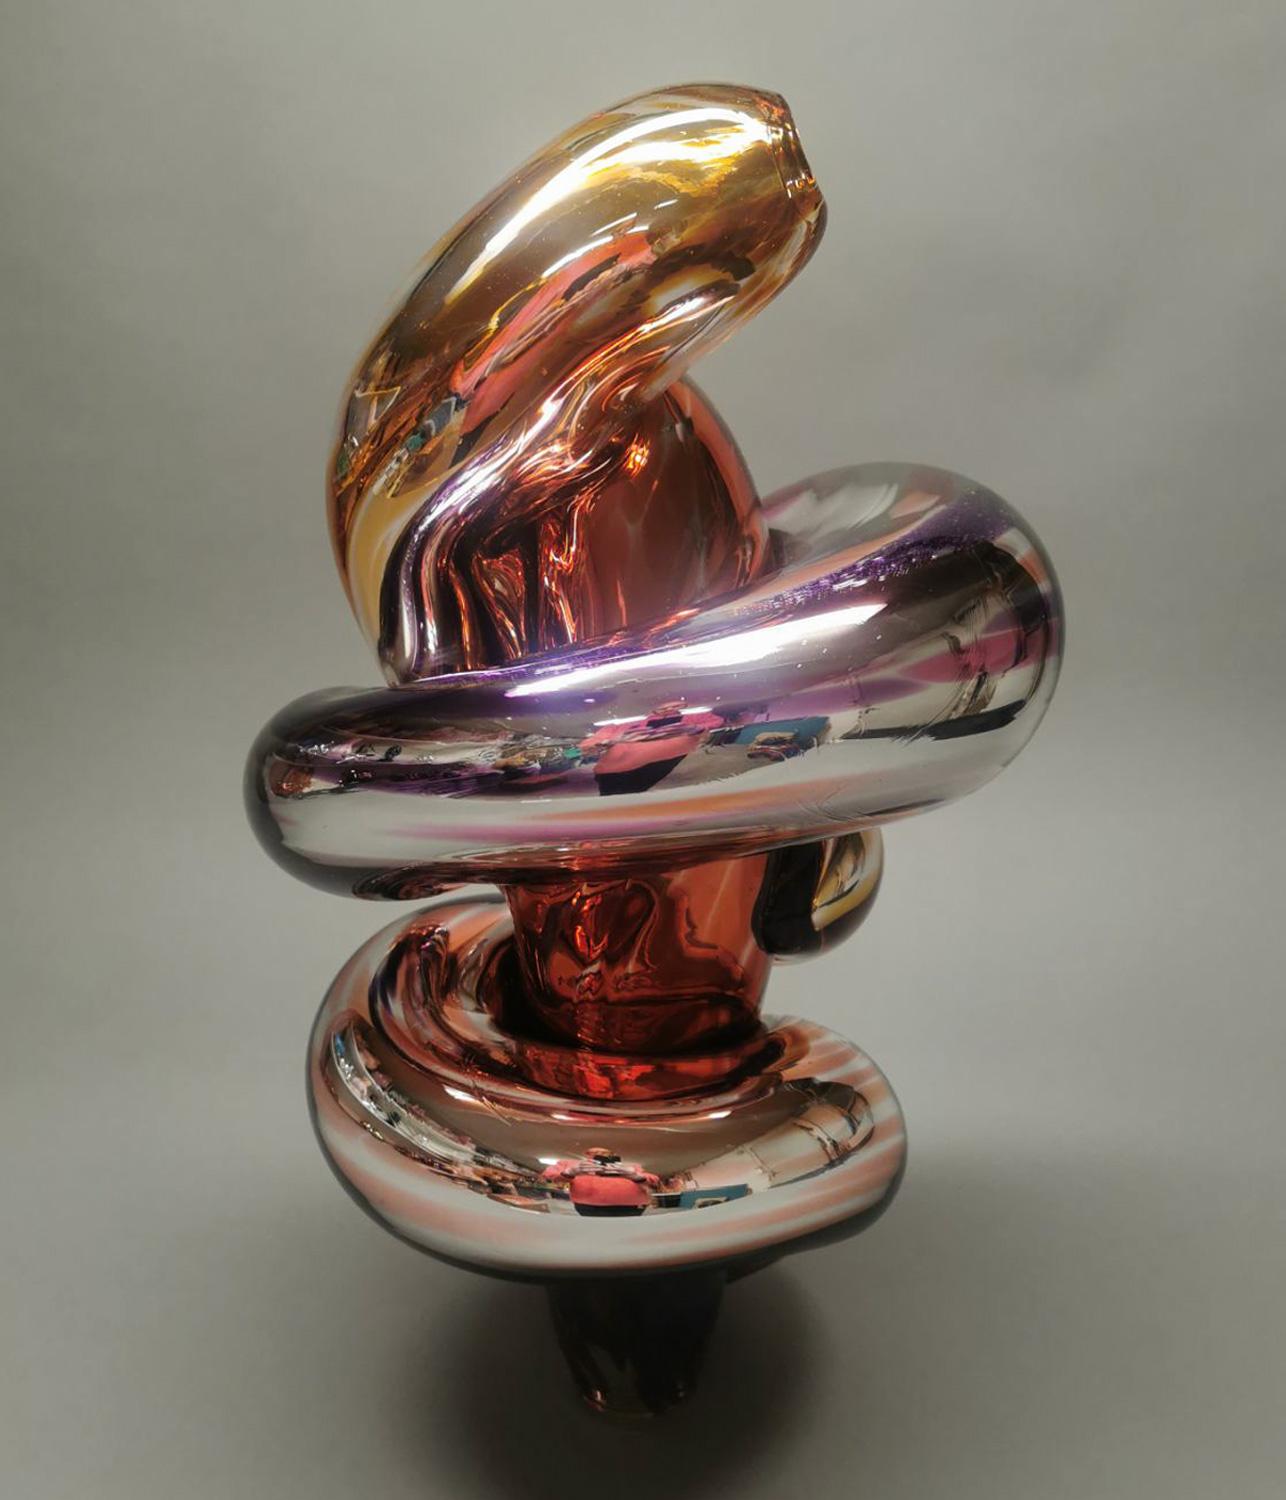 Swedish Abstract, Mirrored Glass Sculpture by Markus Emilsson, In Stock For Sale